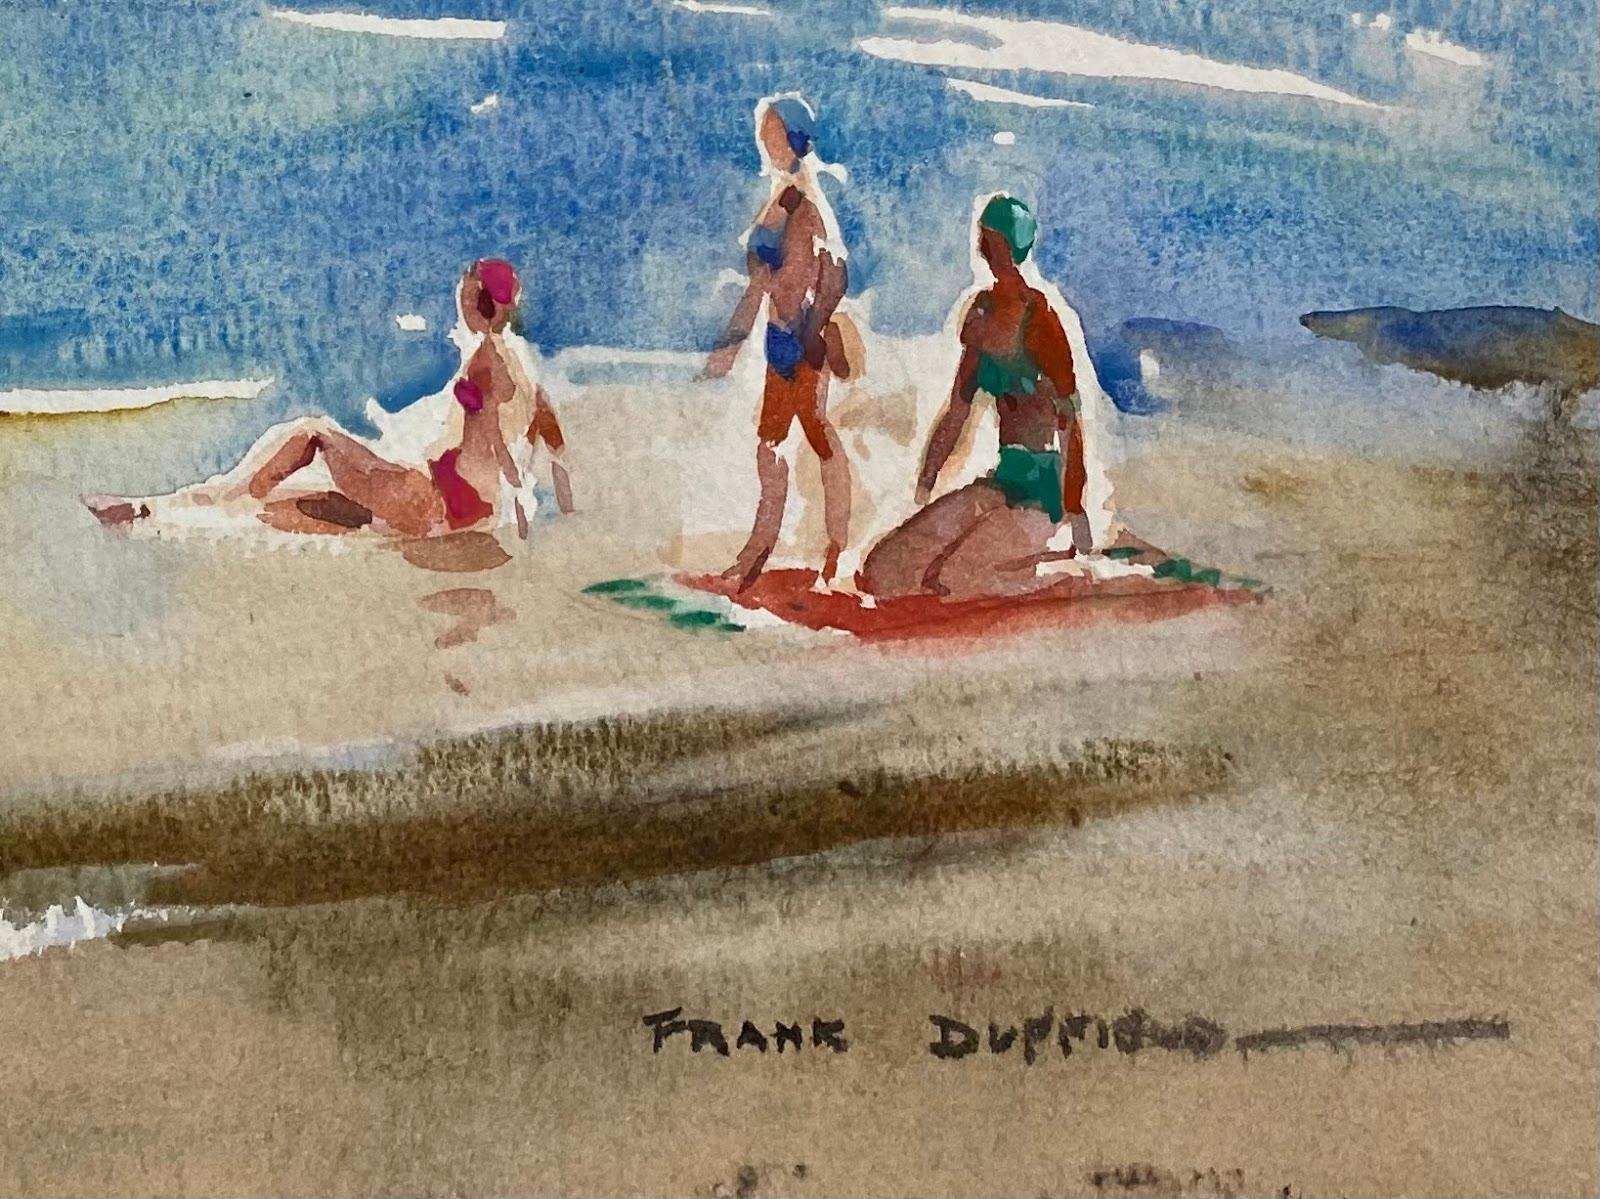 Frank Duffield (British, 1908-1982)
signed original watercolour painting on artistic paper, unframed
size: 10.5 x 14.75 inches
condition: overall very good, minor wear to the edges as is normal for an unframed work, minor staining from age/ light to